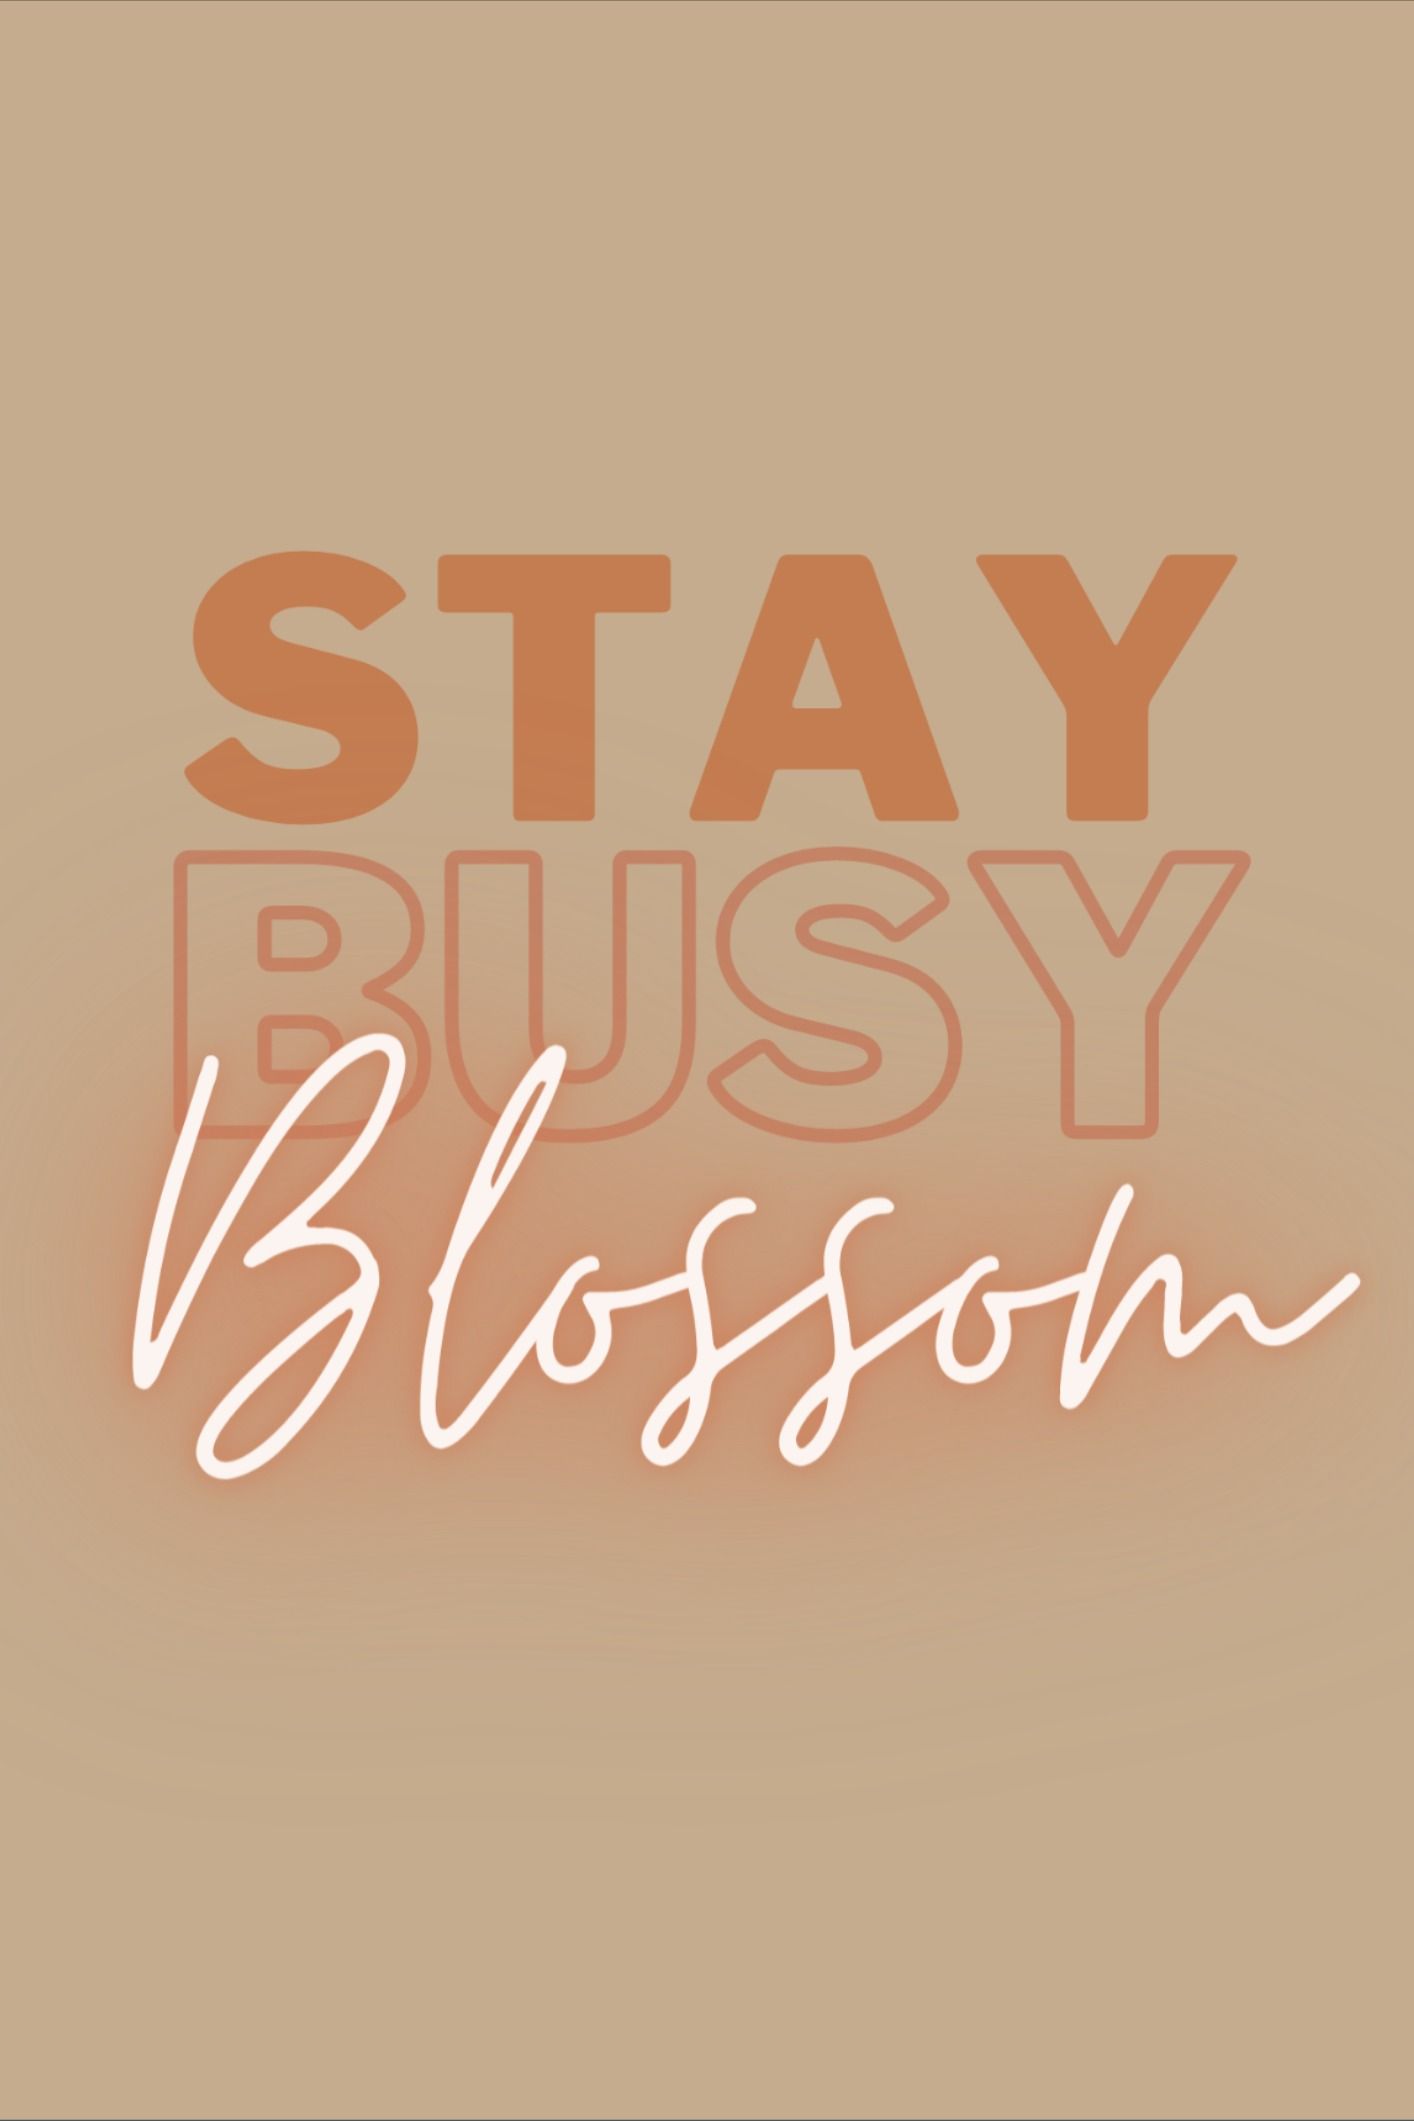 Stay busy blossom inspirational quote wallpaper art print work inspo wall decor bohâ inspirational quotes wallpapers inspirational quotes wallpaper quotes